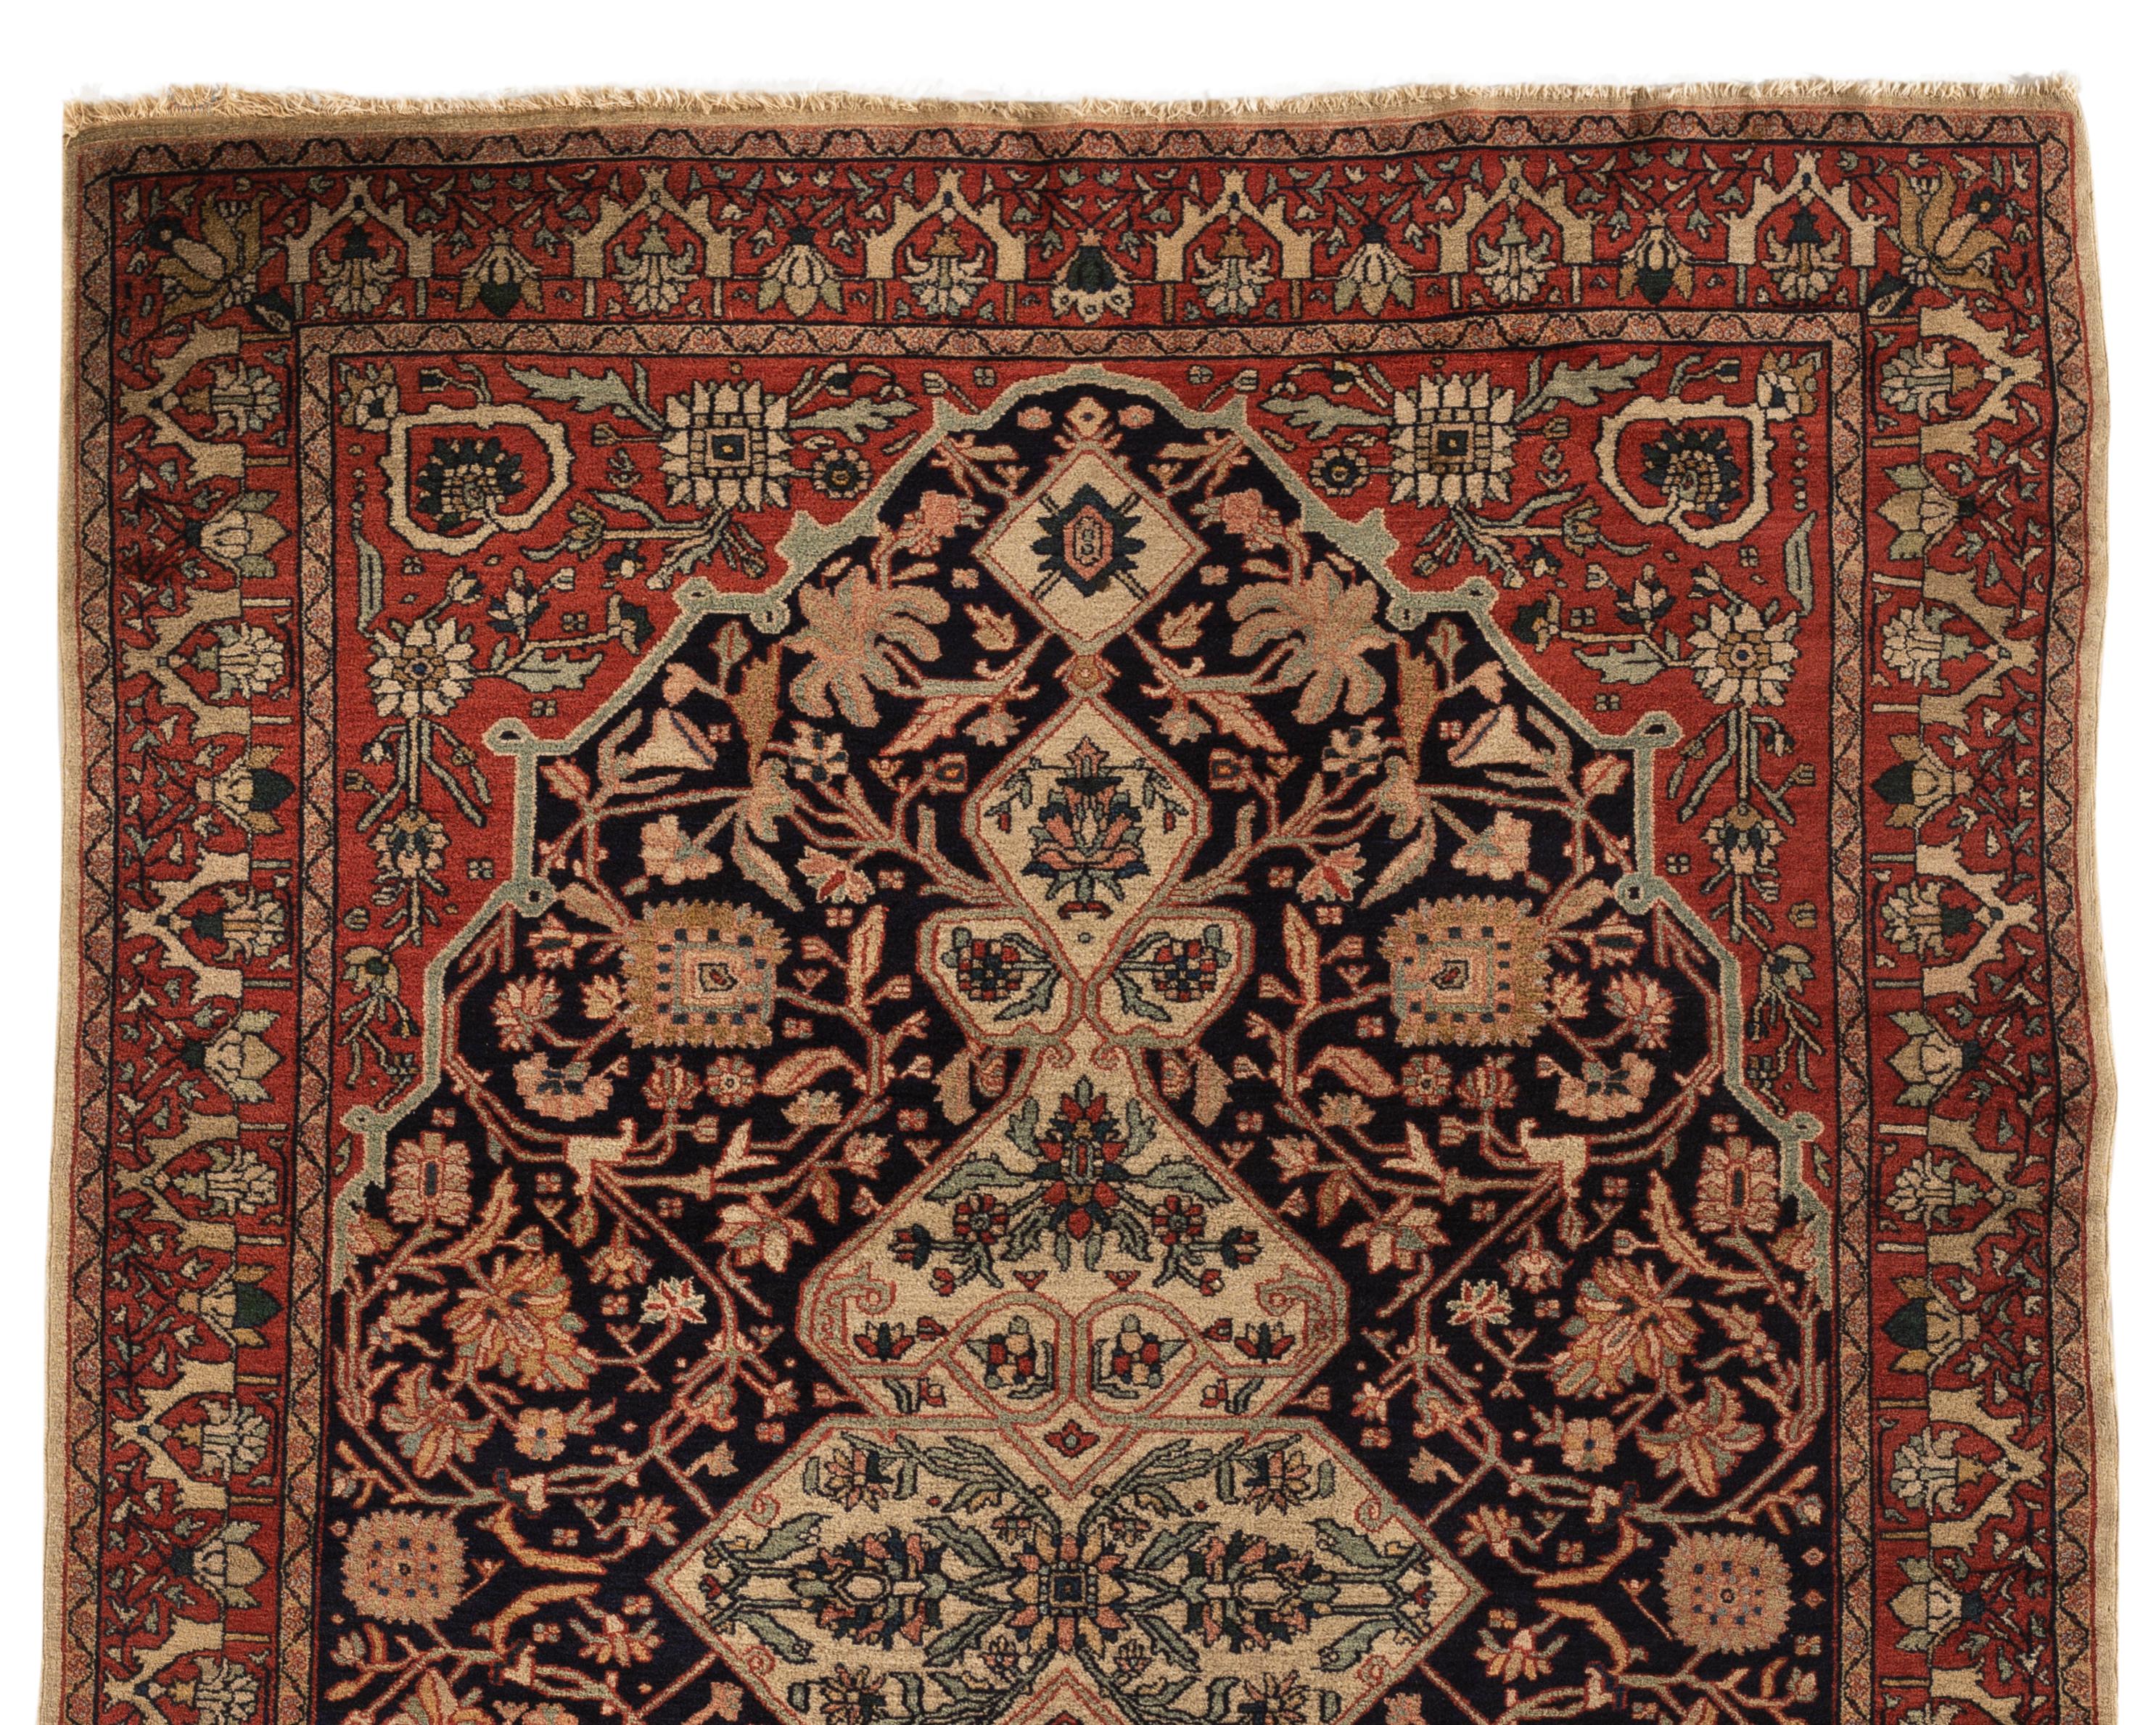 Antique Persian Malayer rug, circa 1890. Antique rugs from Malayer, east of Hamadan, could be considered top quality Hamadan’s and they share similar structural aspects. This lovely small scatter rug has a deep navy field filled with an array of